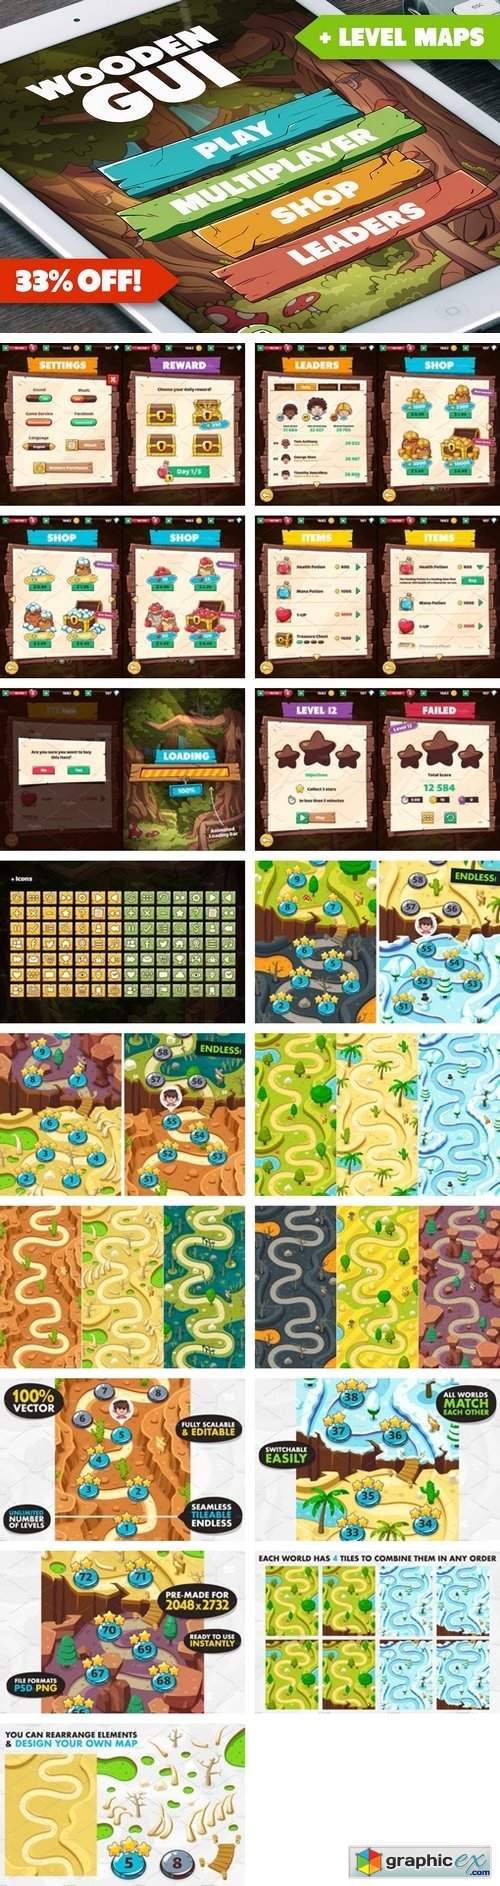 Wooden GUI and Game Level Map BUNDLE